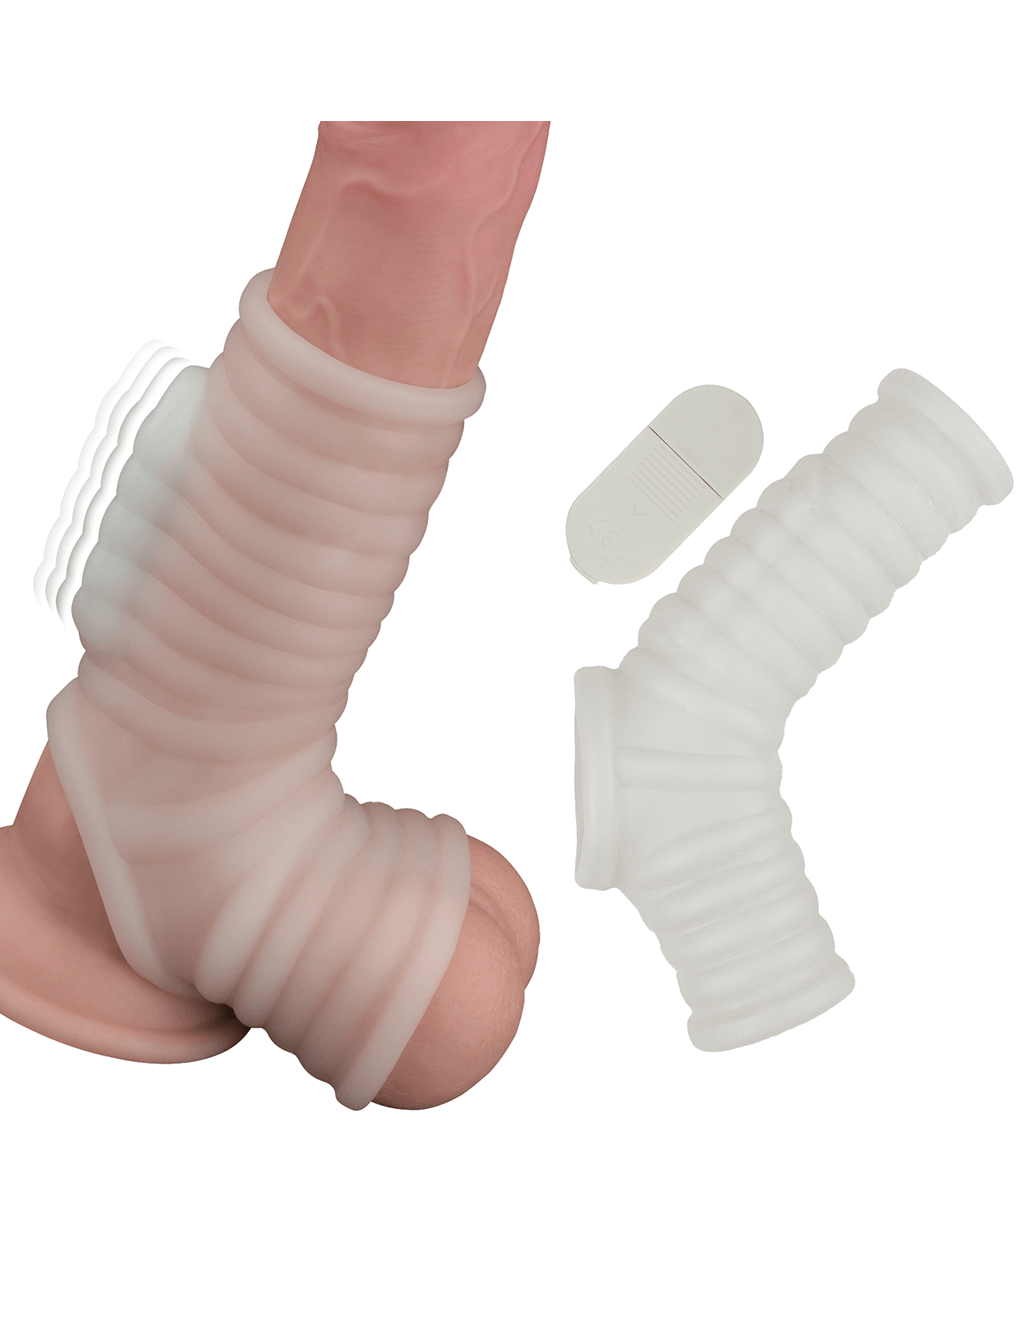 Ribbed Vibrating Power Sleeve - Demo On Toy With Bullet